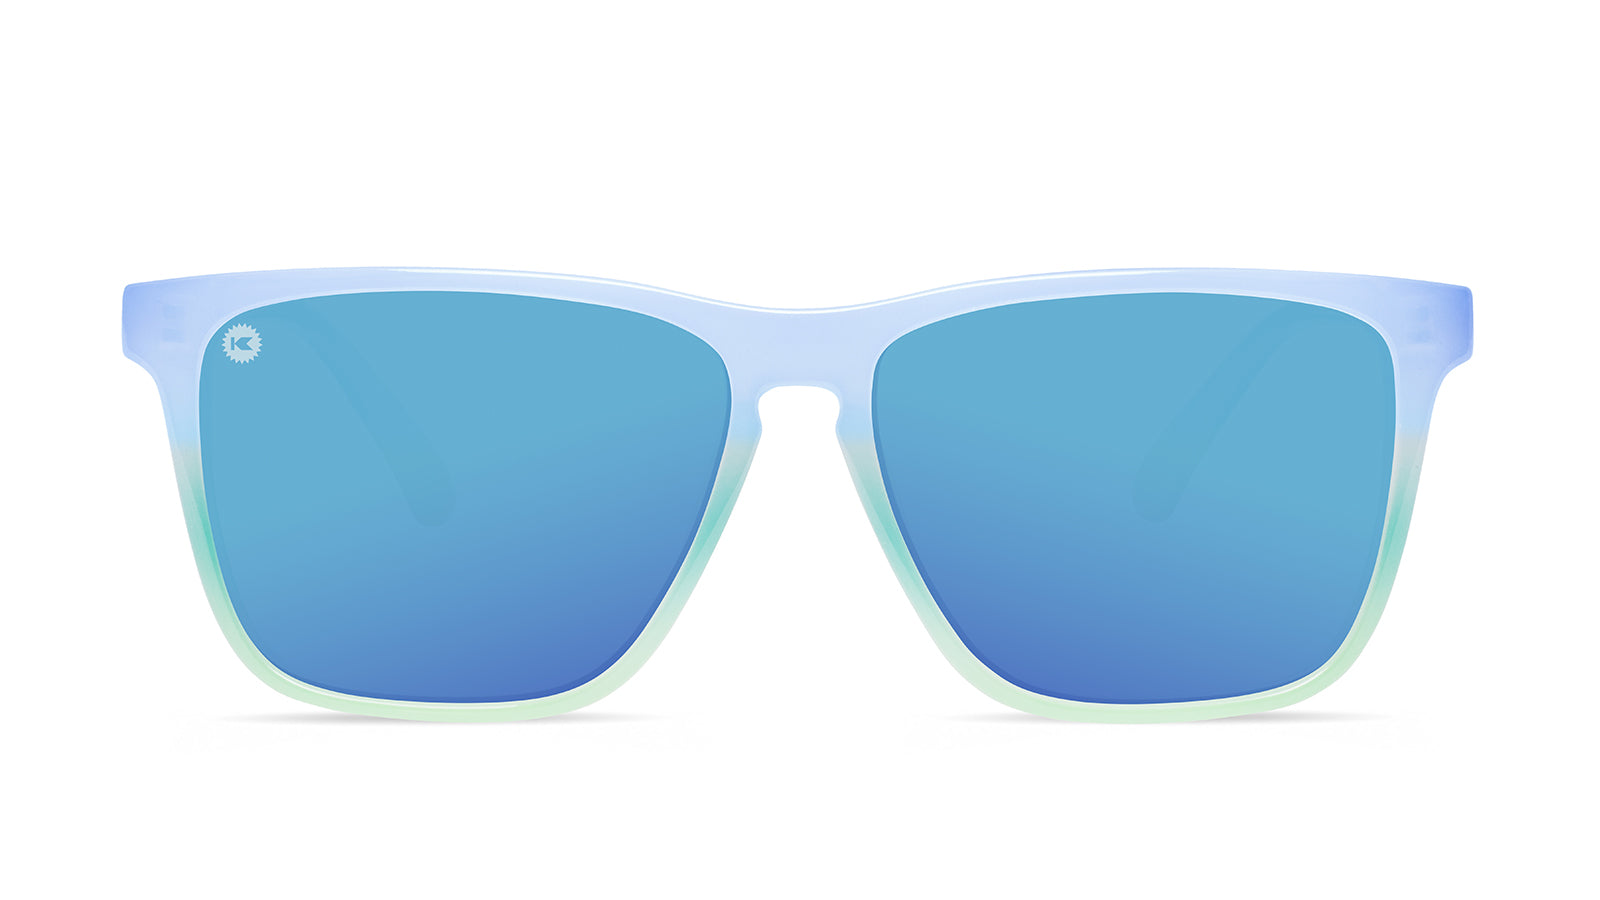 Sunglasses with Purple to Green Fade Frames and Polarized Aqua Lenses, Front